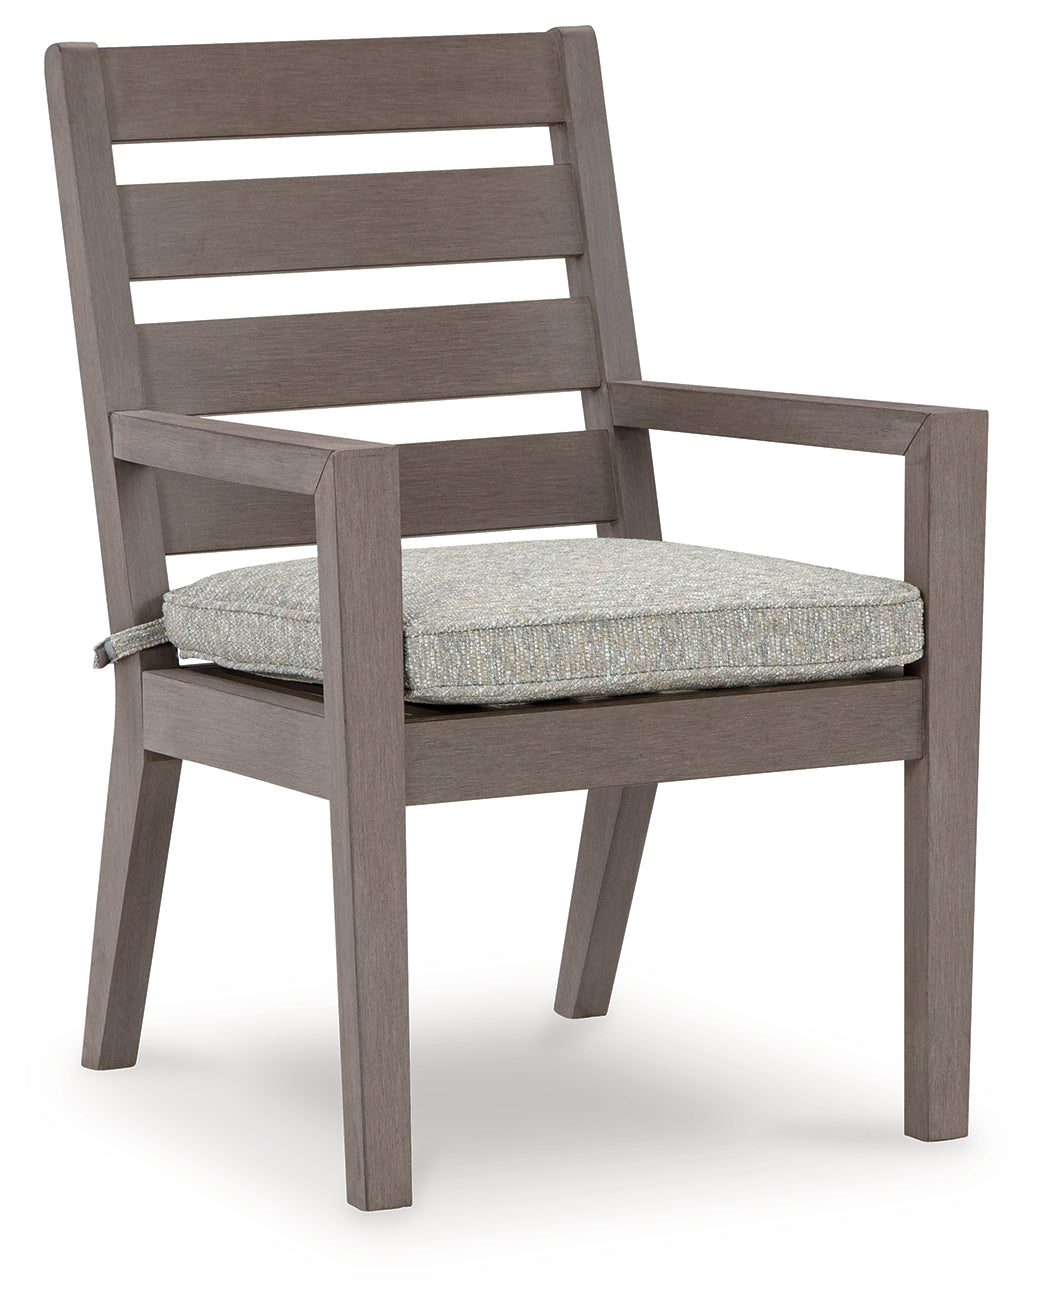 Hillside Barn Gray/Brown Outdoor Dining Arm Chair (Set of 2) - P564-601A - Luna Furniture